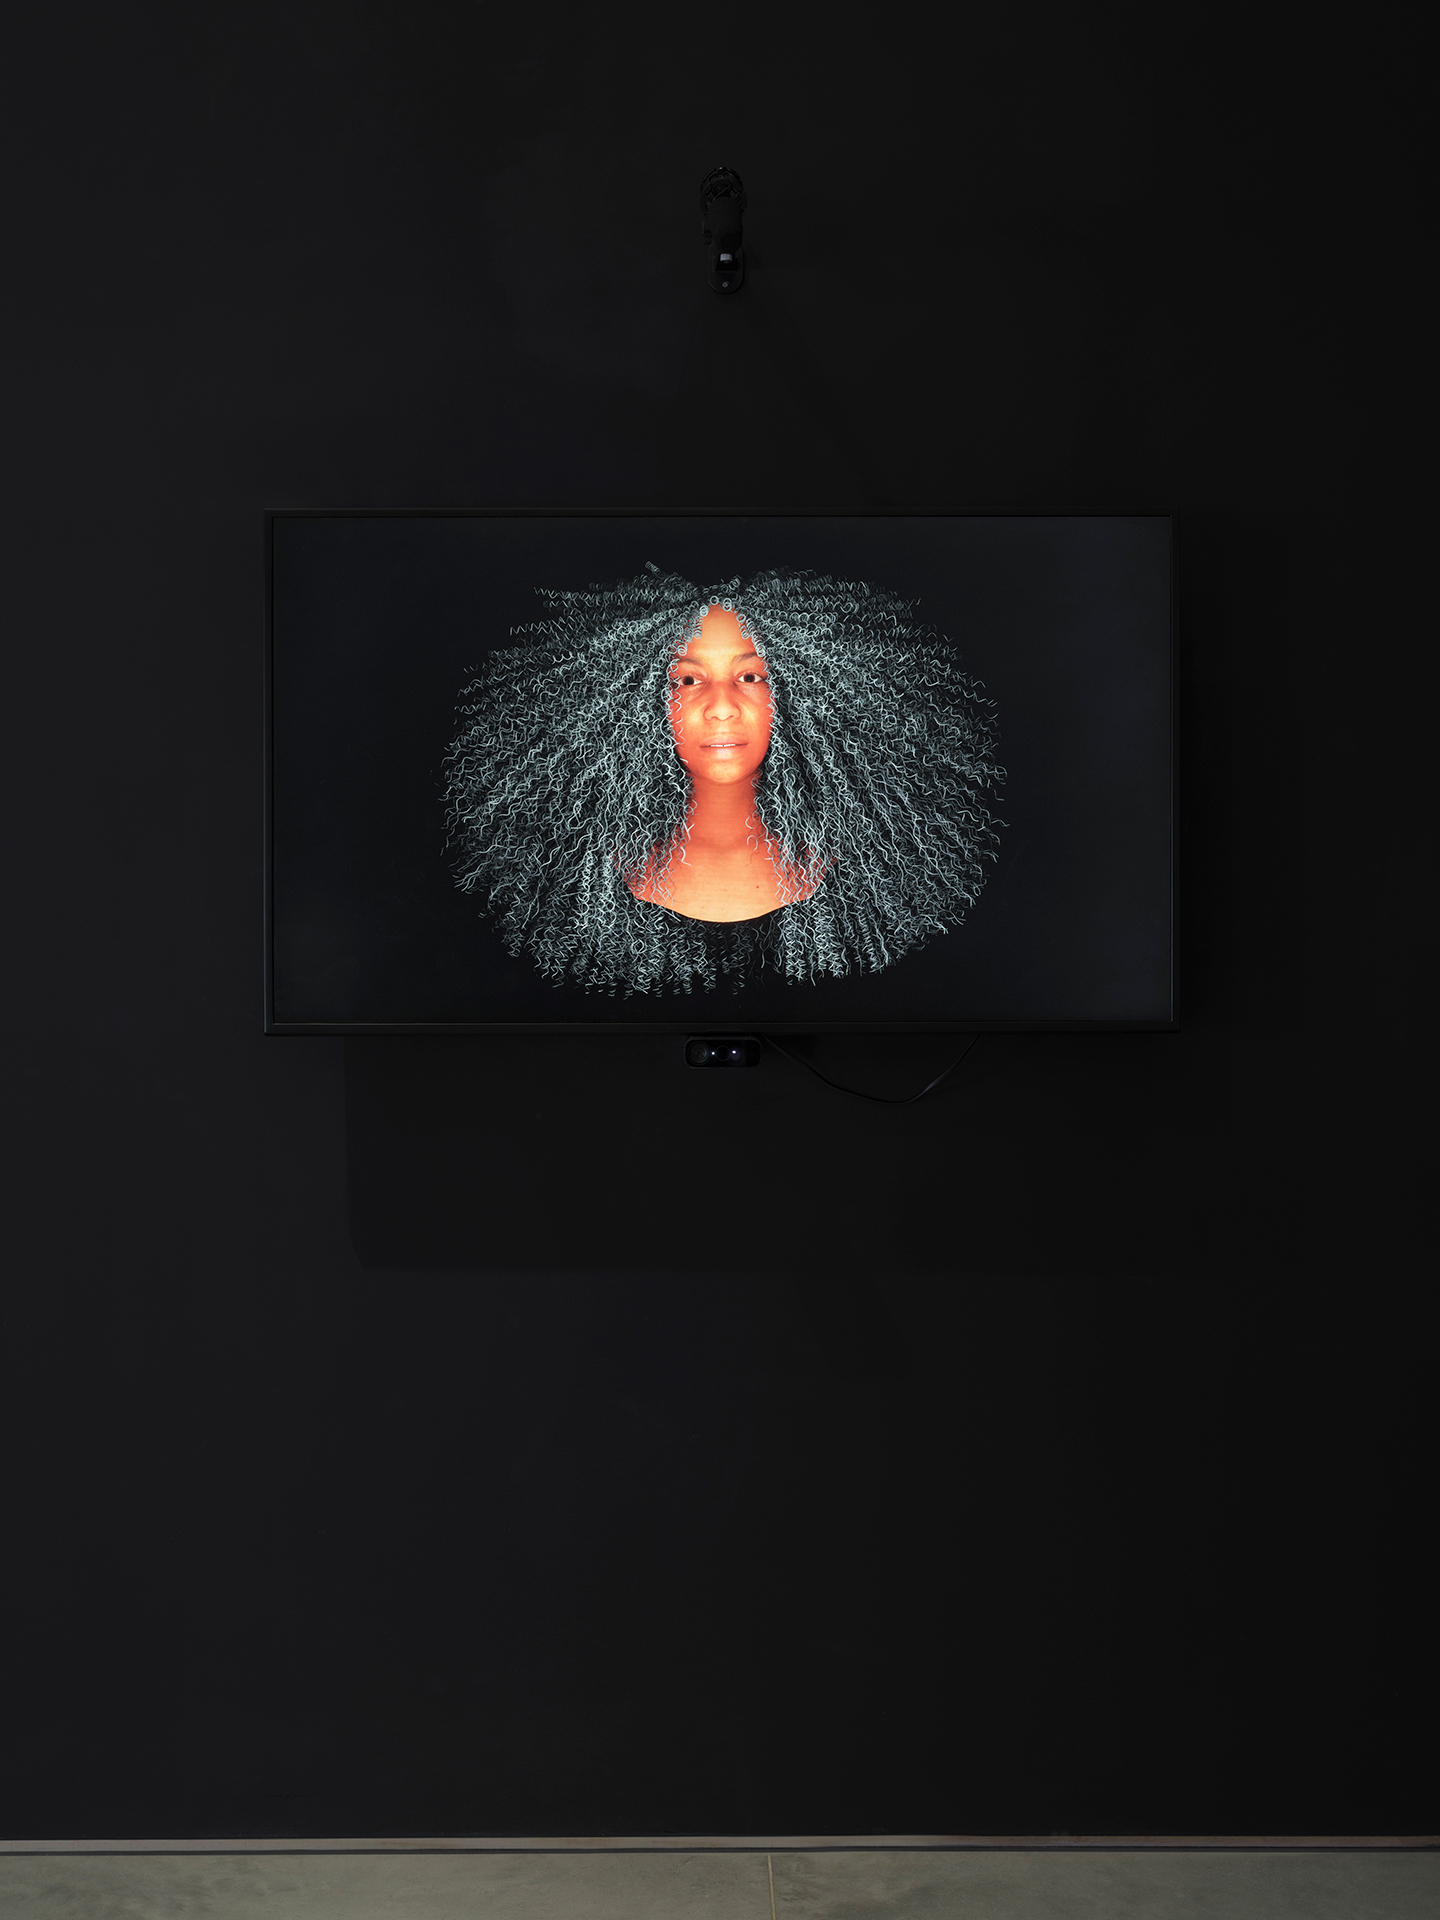 Image of a Black woman’s head on a black background. The woman has saturated orange skin and long white curly hair.